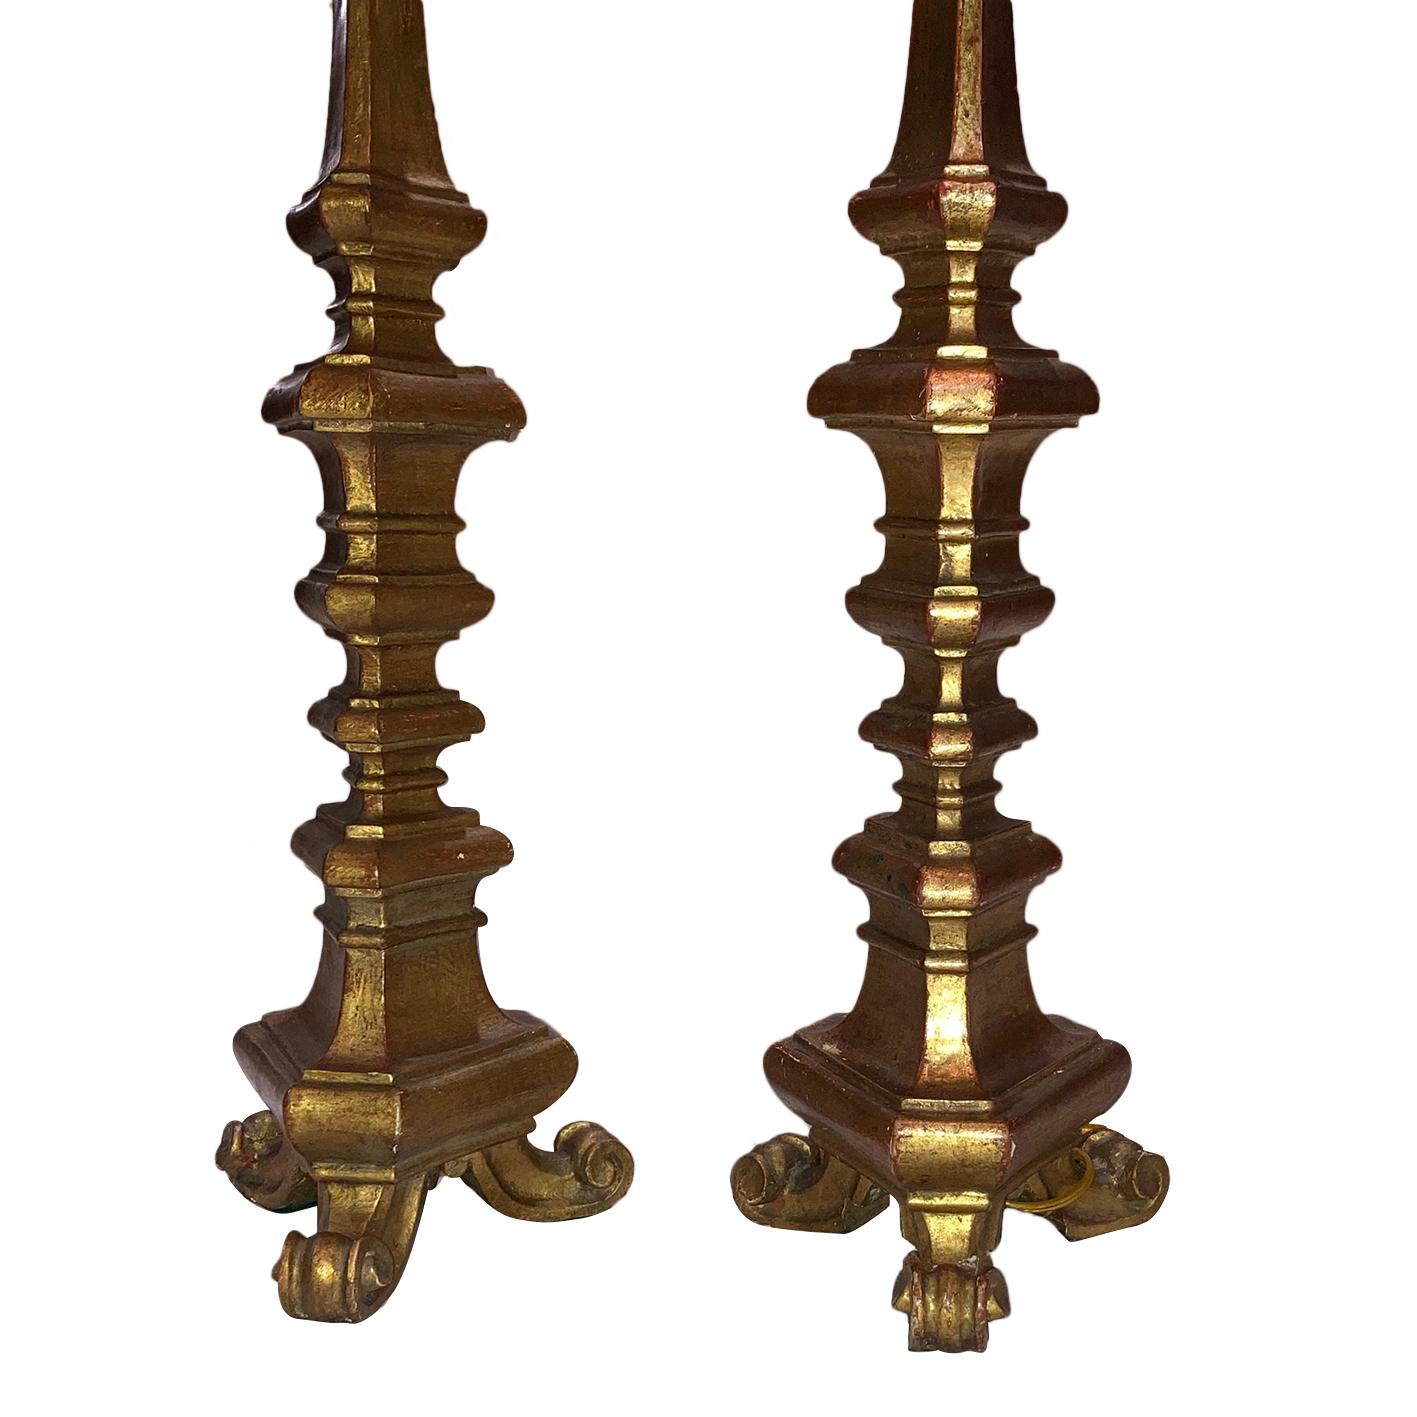 A pair of circa 1950s Italian carved and giltwood candlestick table lamps with original patina.

Measurements:
Height of body 23.5